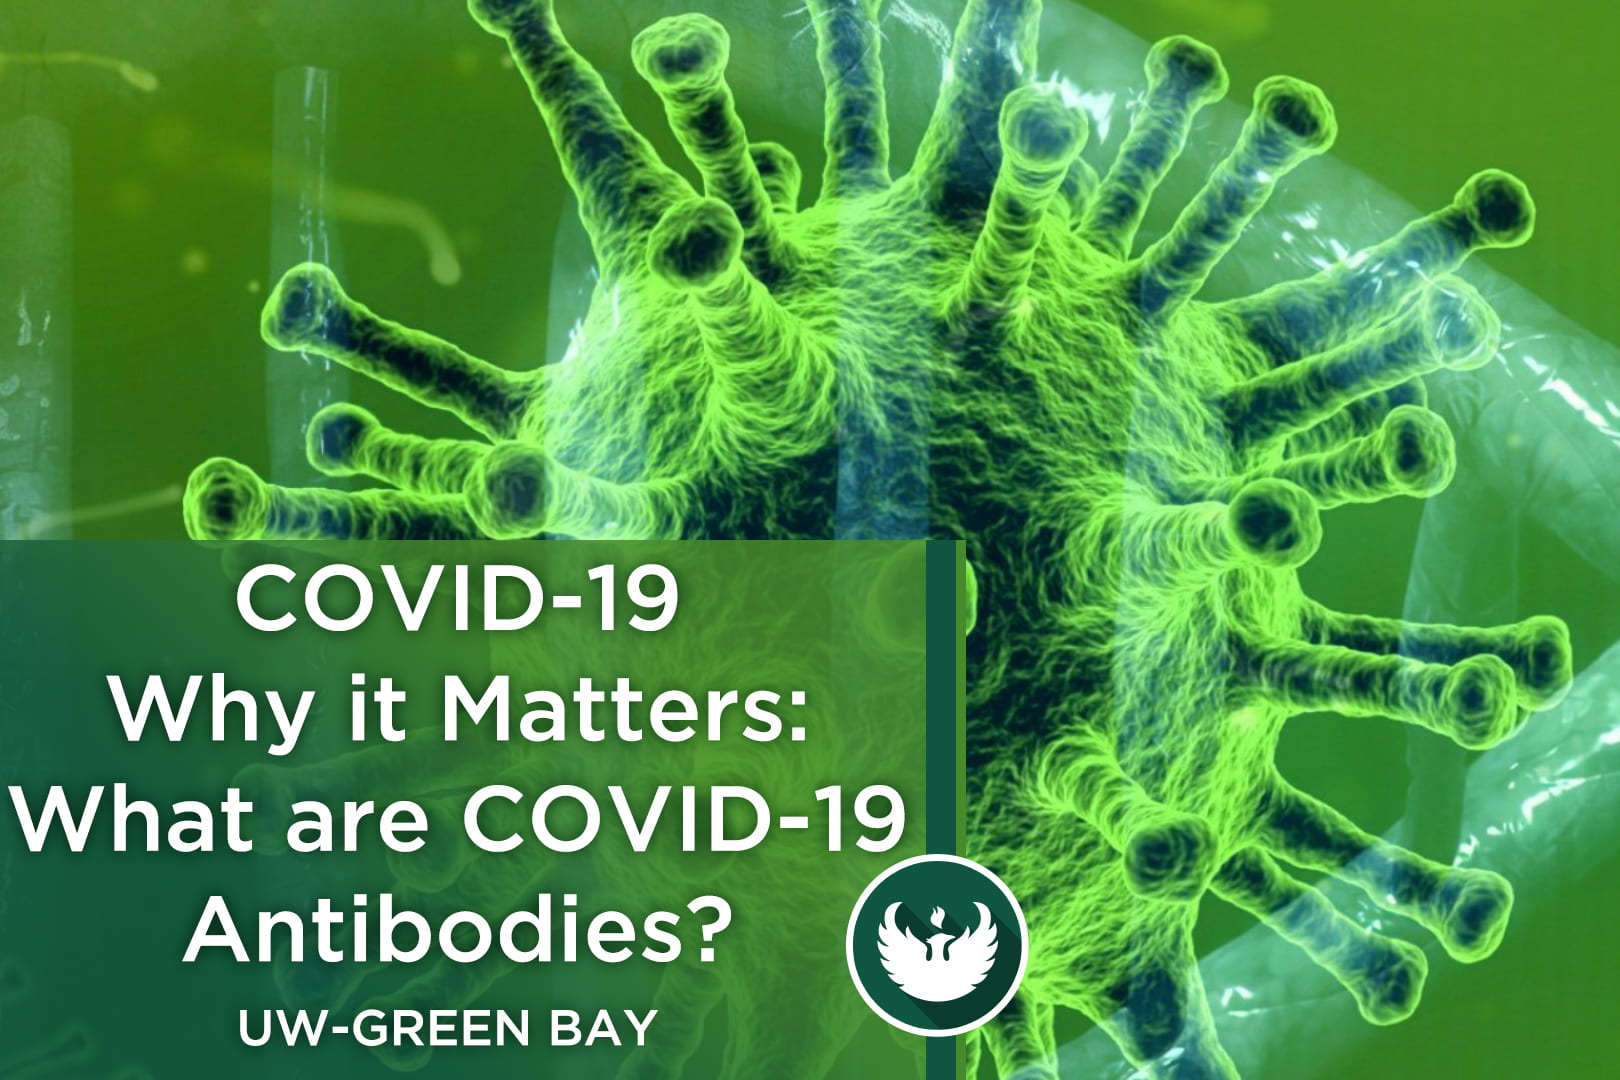 Microscopic enlargement of the COVID-19 virus with the title, "COVID-19 Why it Matters: Part 15, What are COVID-19 Antibodies?"